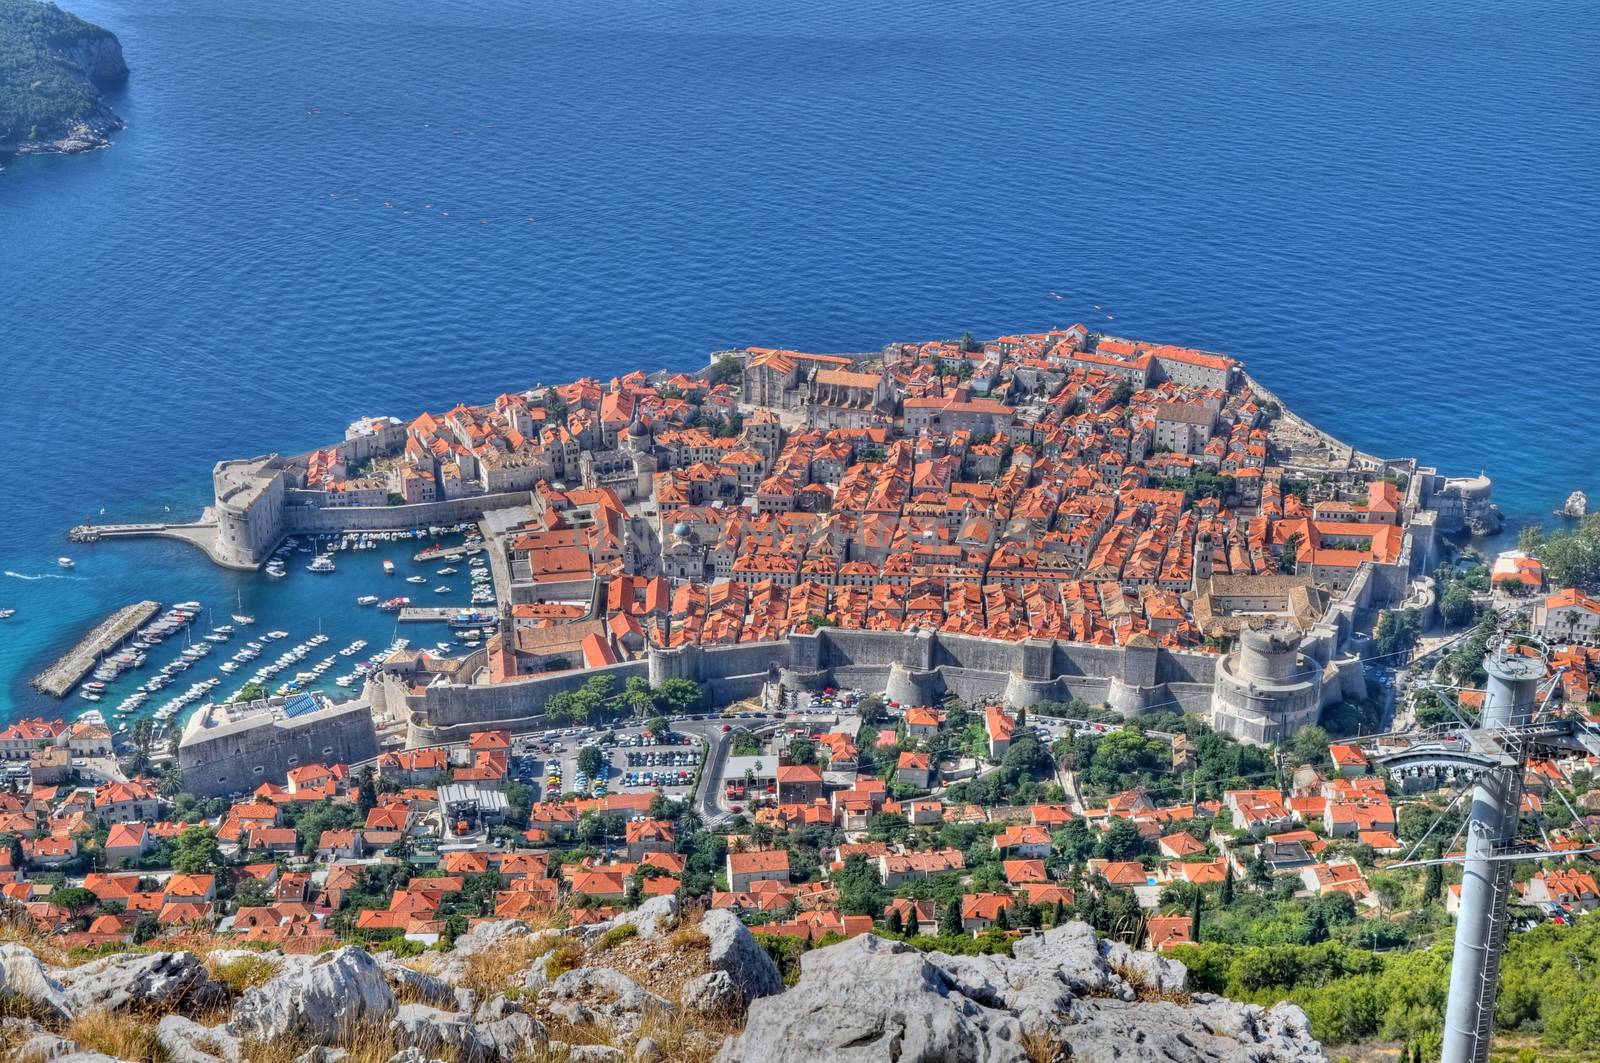 City of Dubrovnik in Croatia from above by anderm